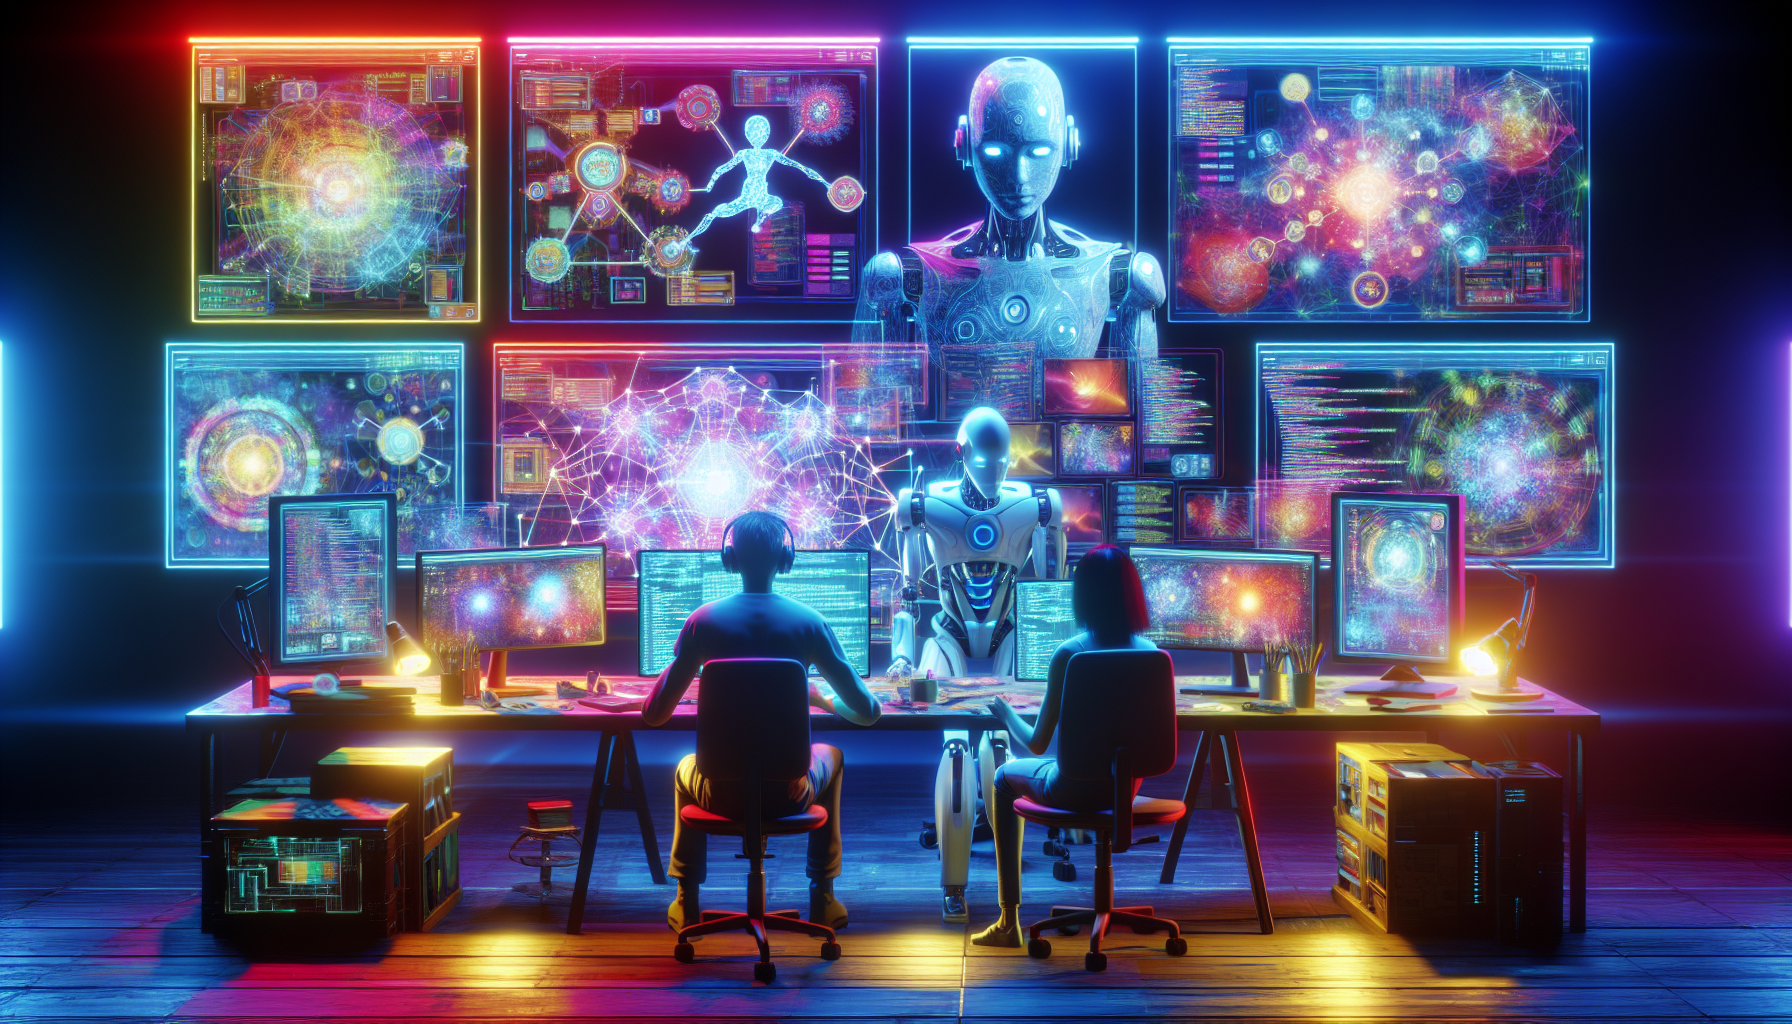 An artistically rendered futuristic workspace where a humanoid robot and a human are collaboratively working on a holographic screen, visualizing complex script flowcharts and character interactions f